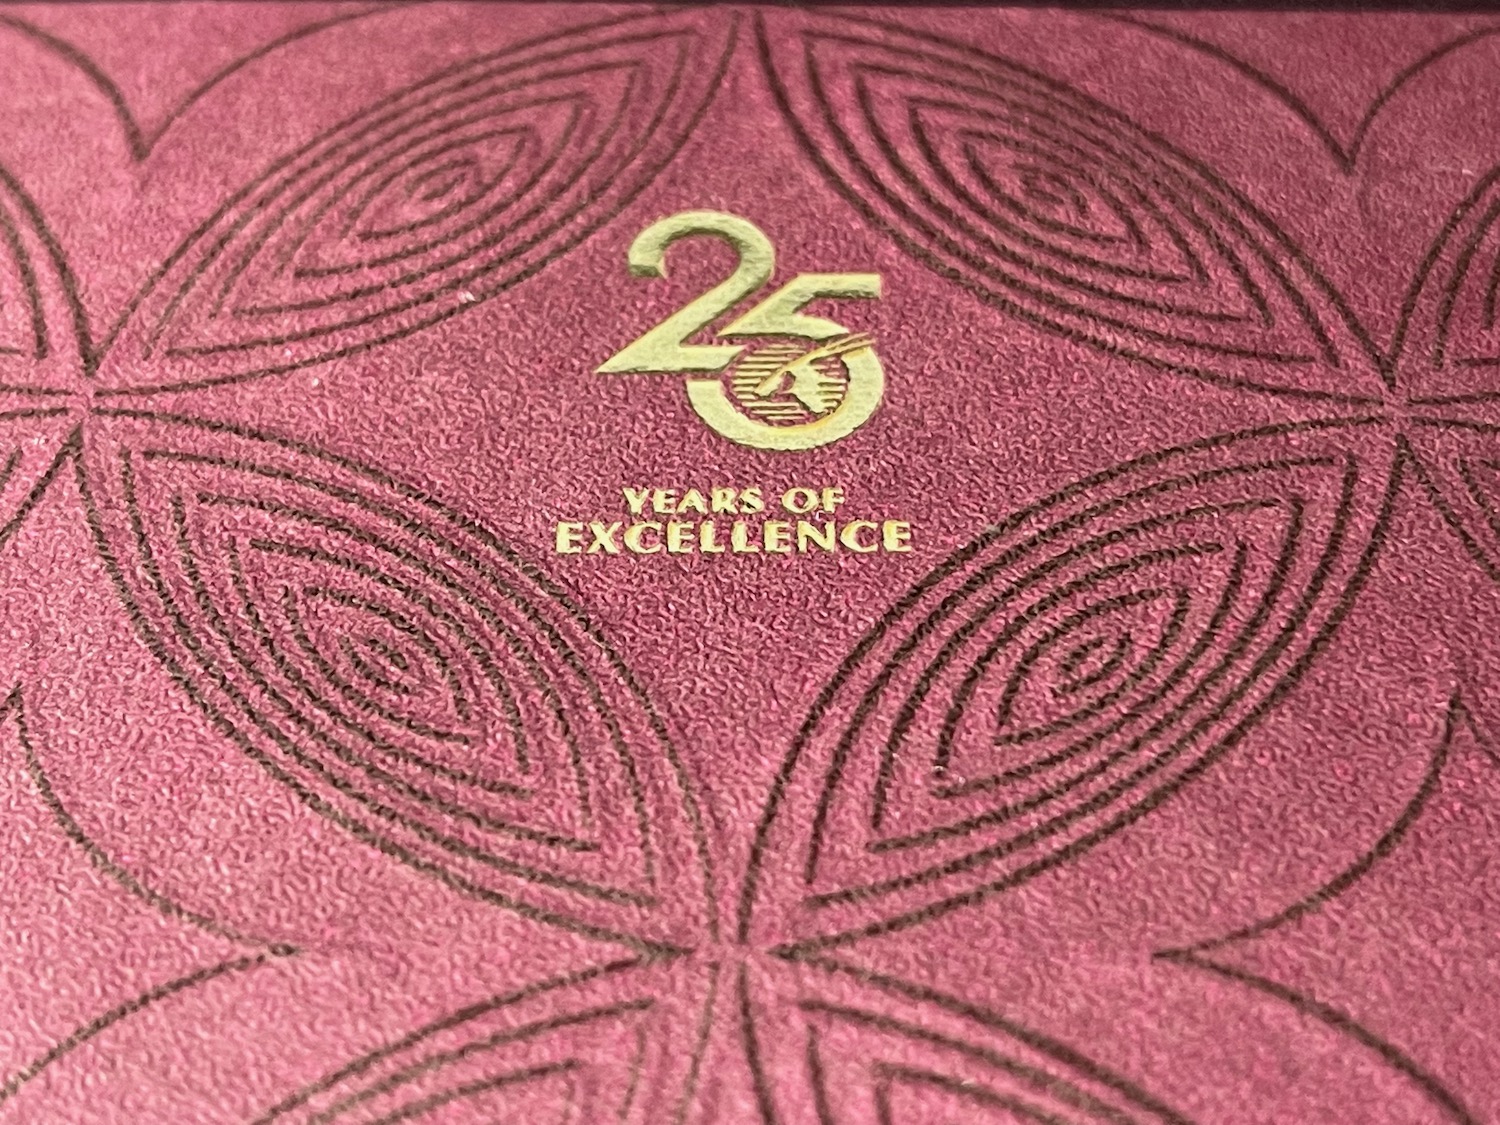 a red book with a gold logo